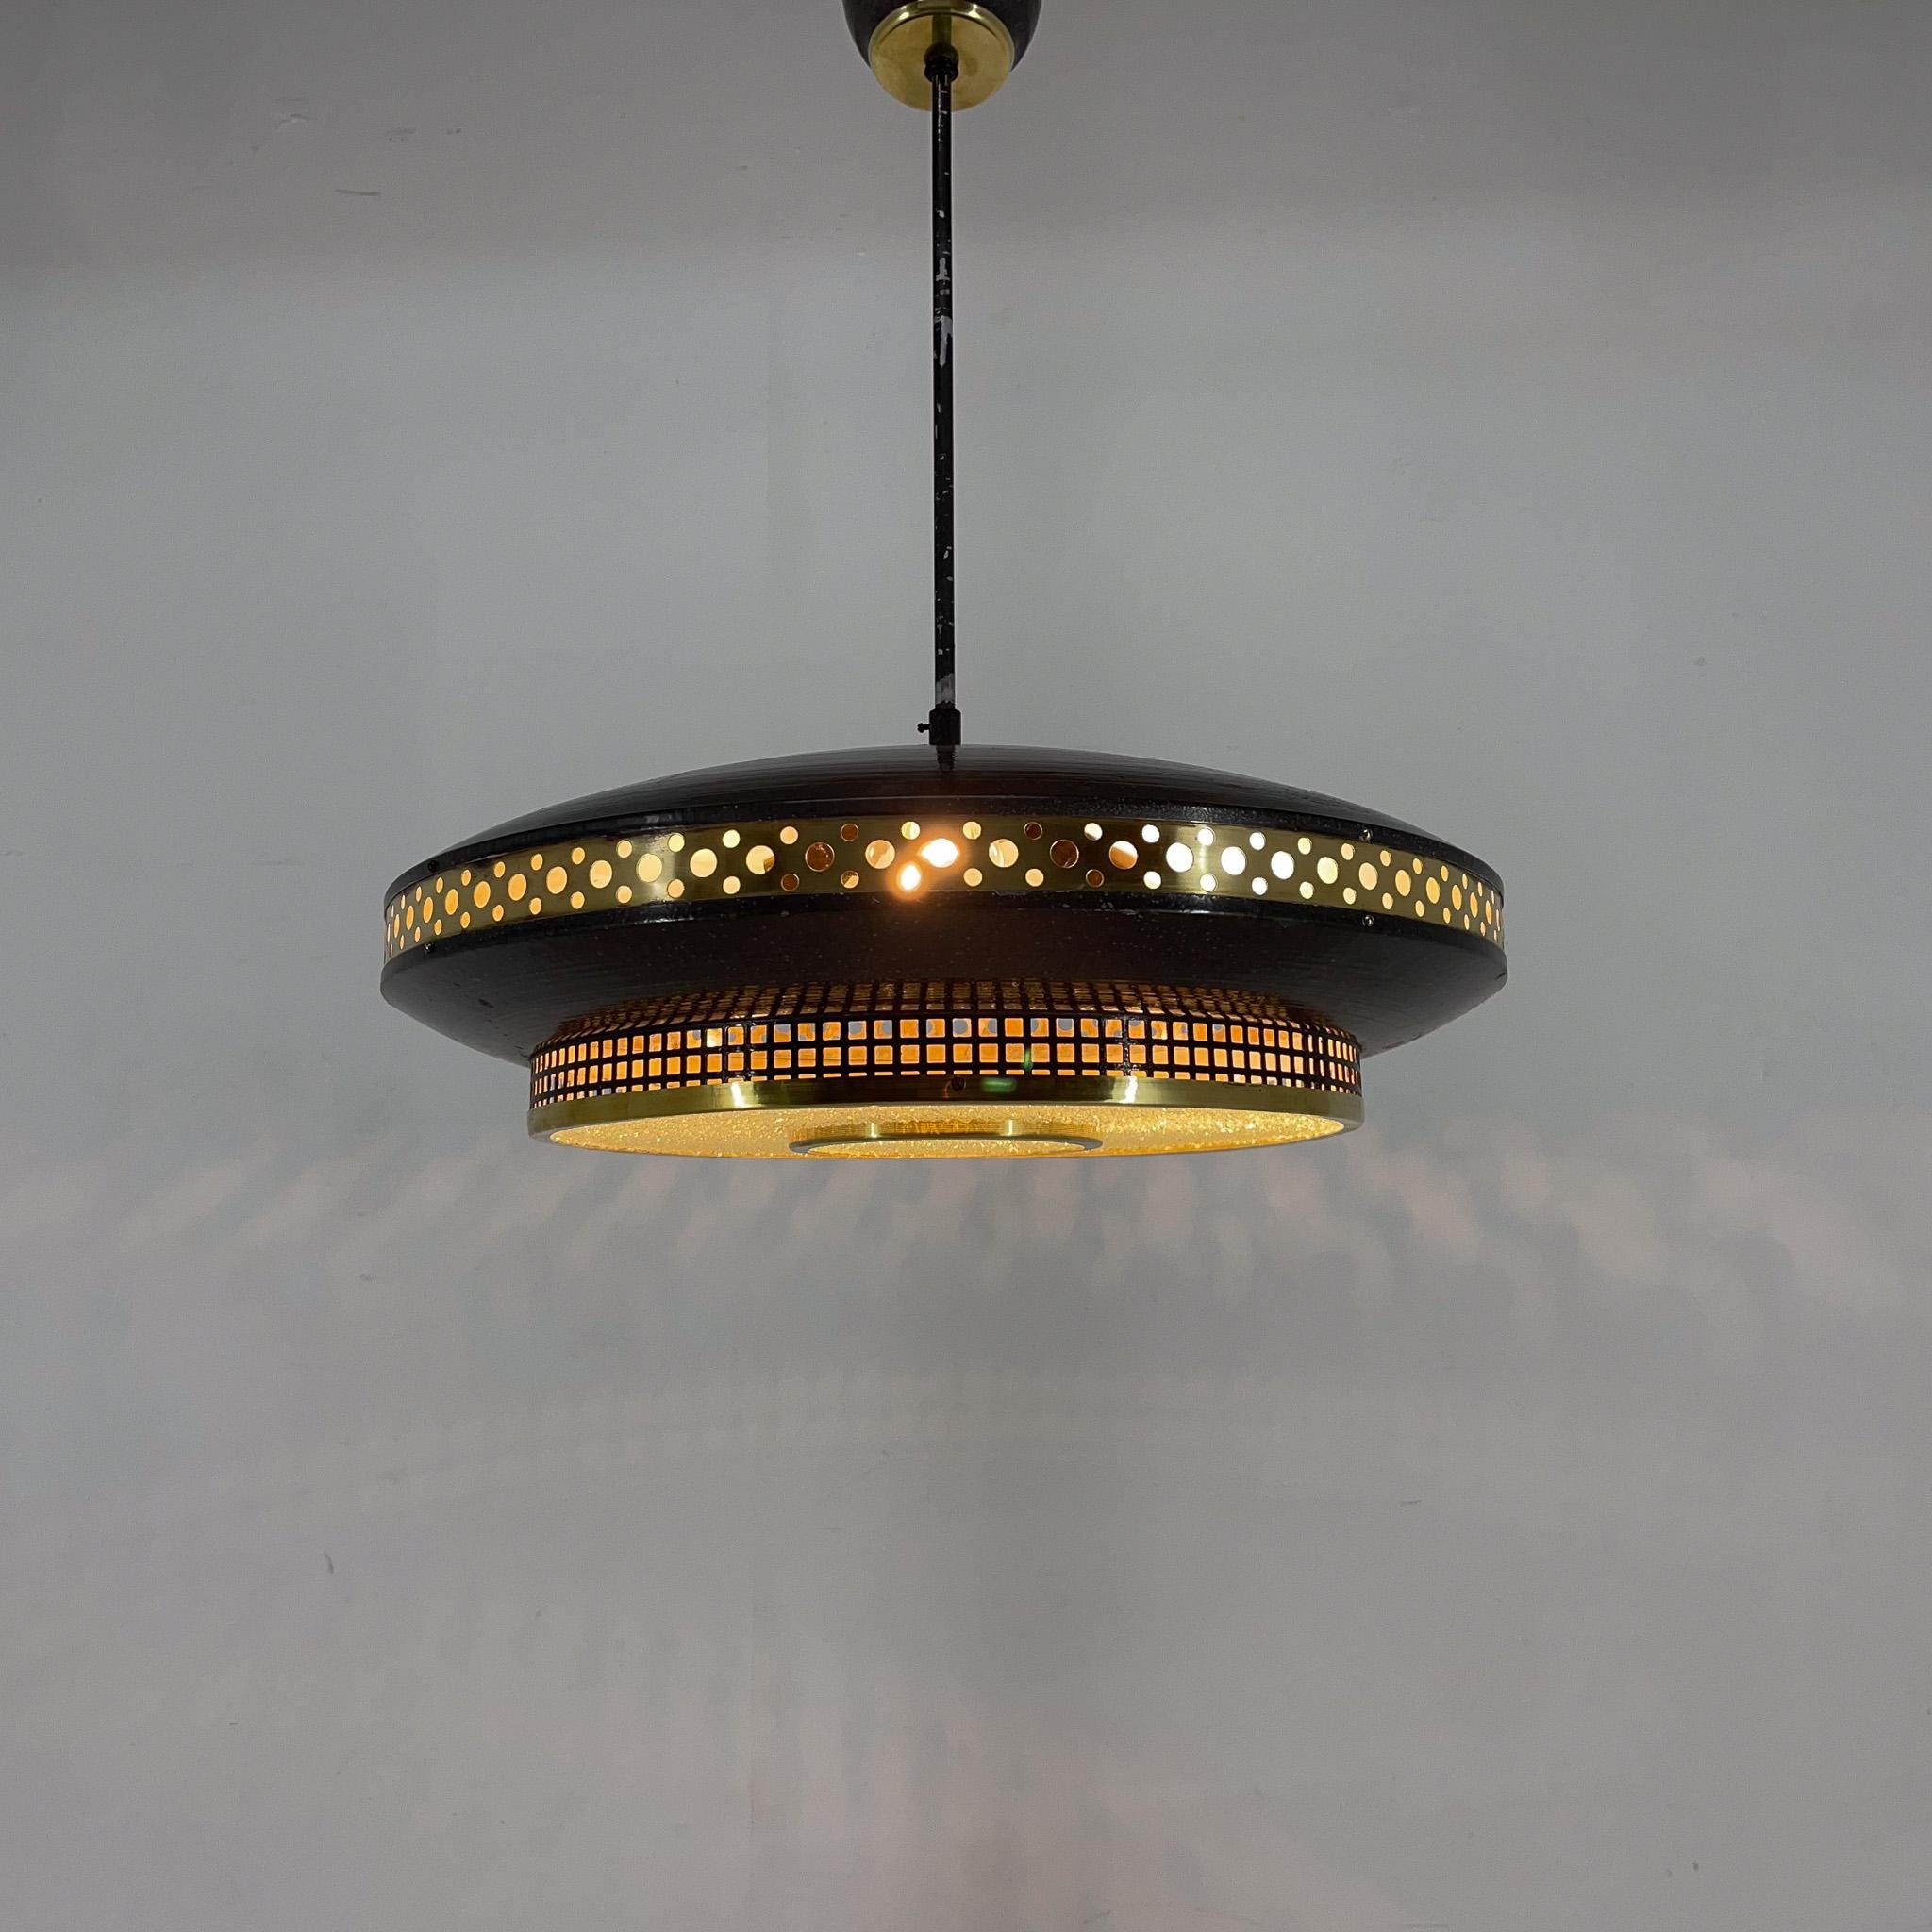 Dark grey metal ring pendant with brass perforated strip by ĽUDIB Bratislava. Manufactured in former Czechoslovakia in the 1960's.
Bulbs: 3 x E26-E27. 
US wiring compatible.